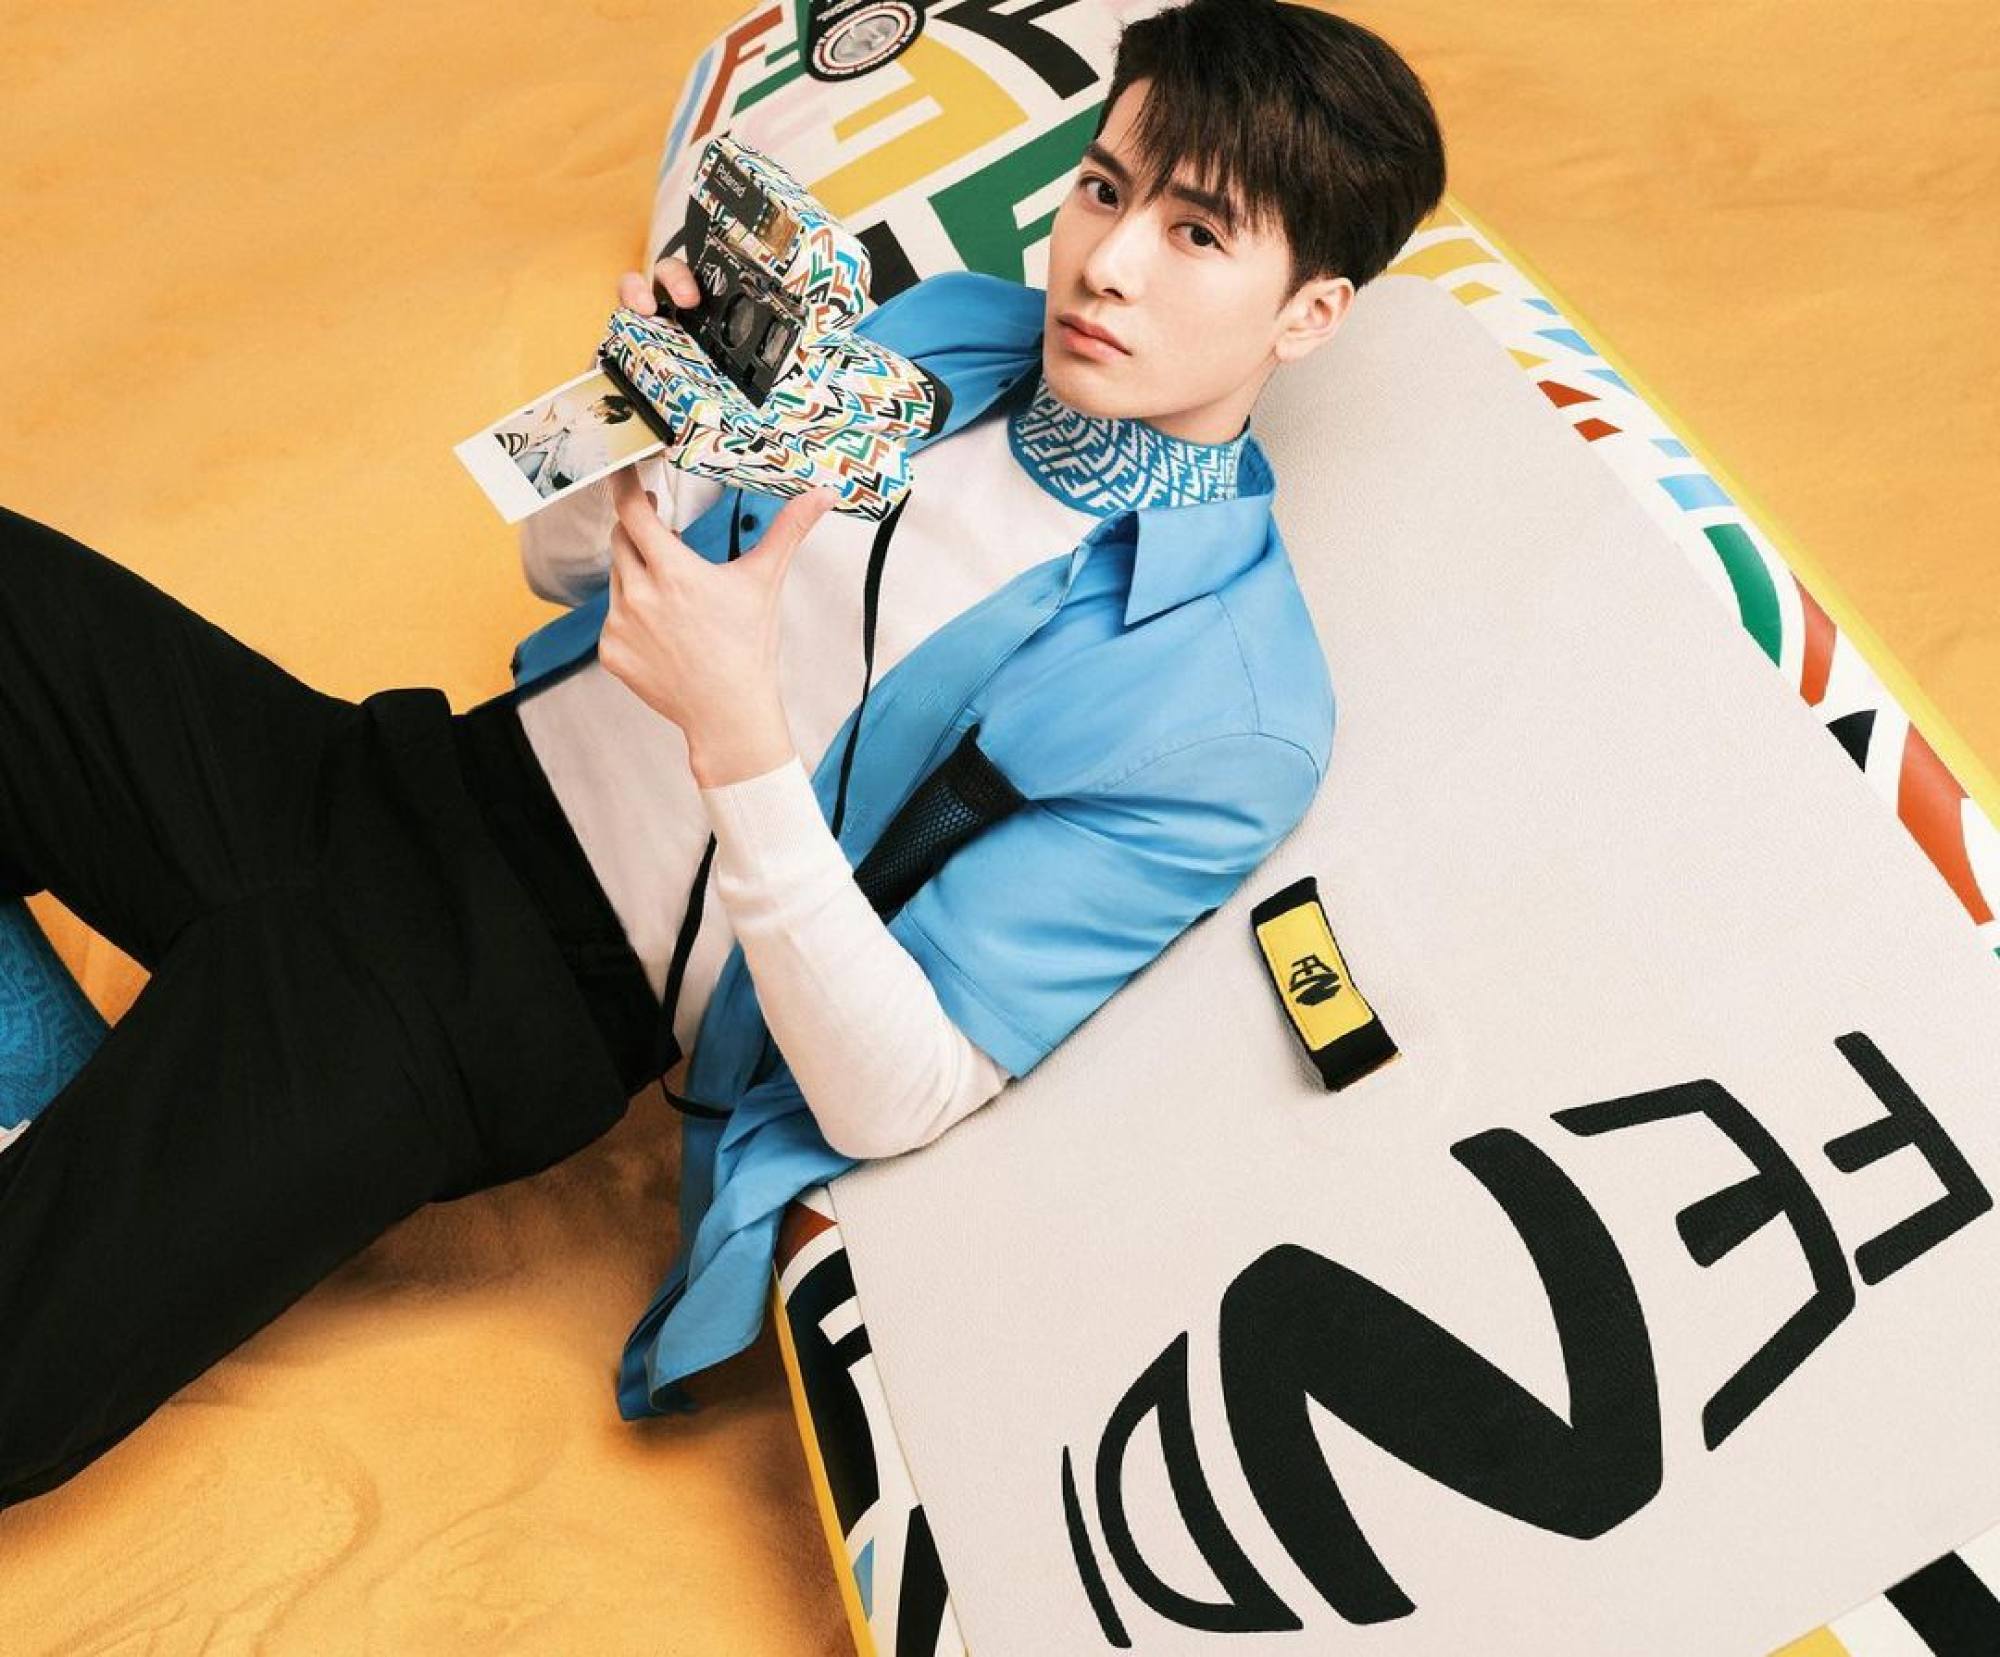 6 of Jackson Wang's most impressive fashion endorsements, from his